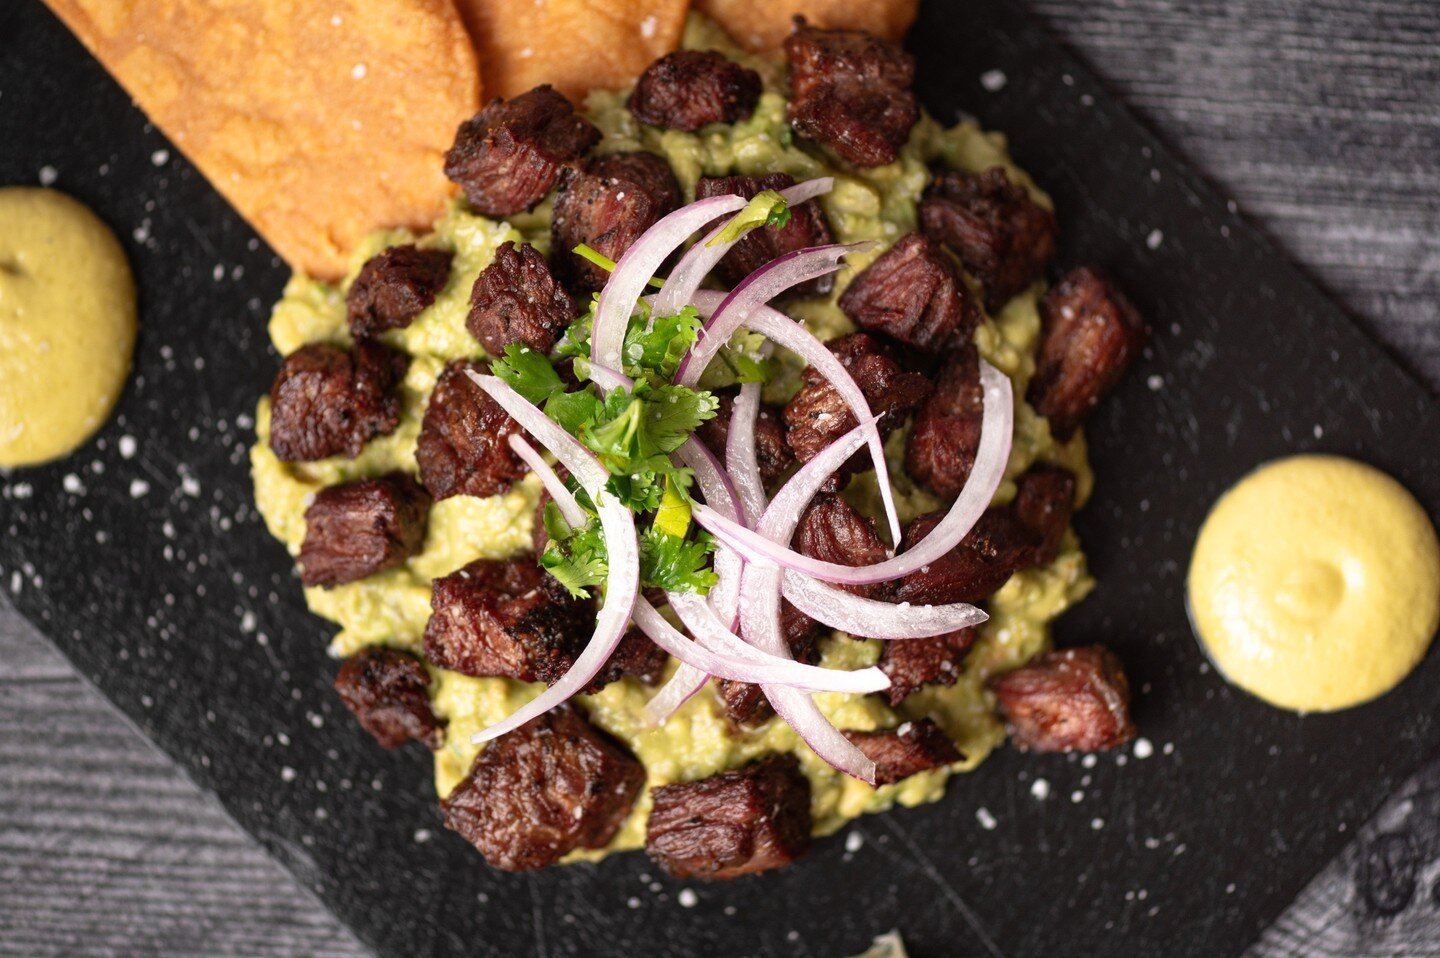 Our delicious Chicharr&oacute;n de Arrachera is perfect for sharing but it's so good, that we don't judge if you want it all for yourself. #🥩⁠
⁠
⁠
⁠
⁠
⁠
⁠
⁠
⁠
⁠
⁠
⁠
#cuishe #cuishecocinamexicana #guacamole #guac #avocado #beef #wagyubeef #heartbrand